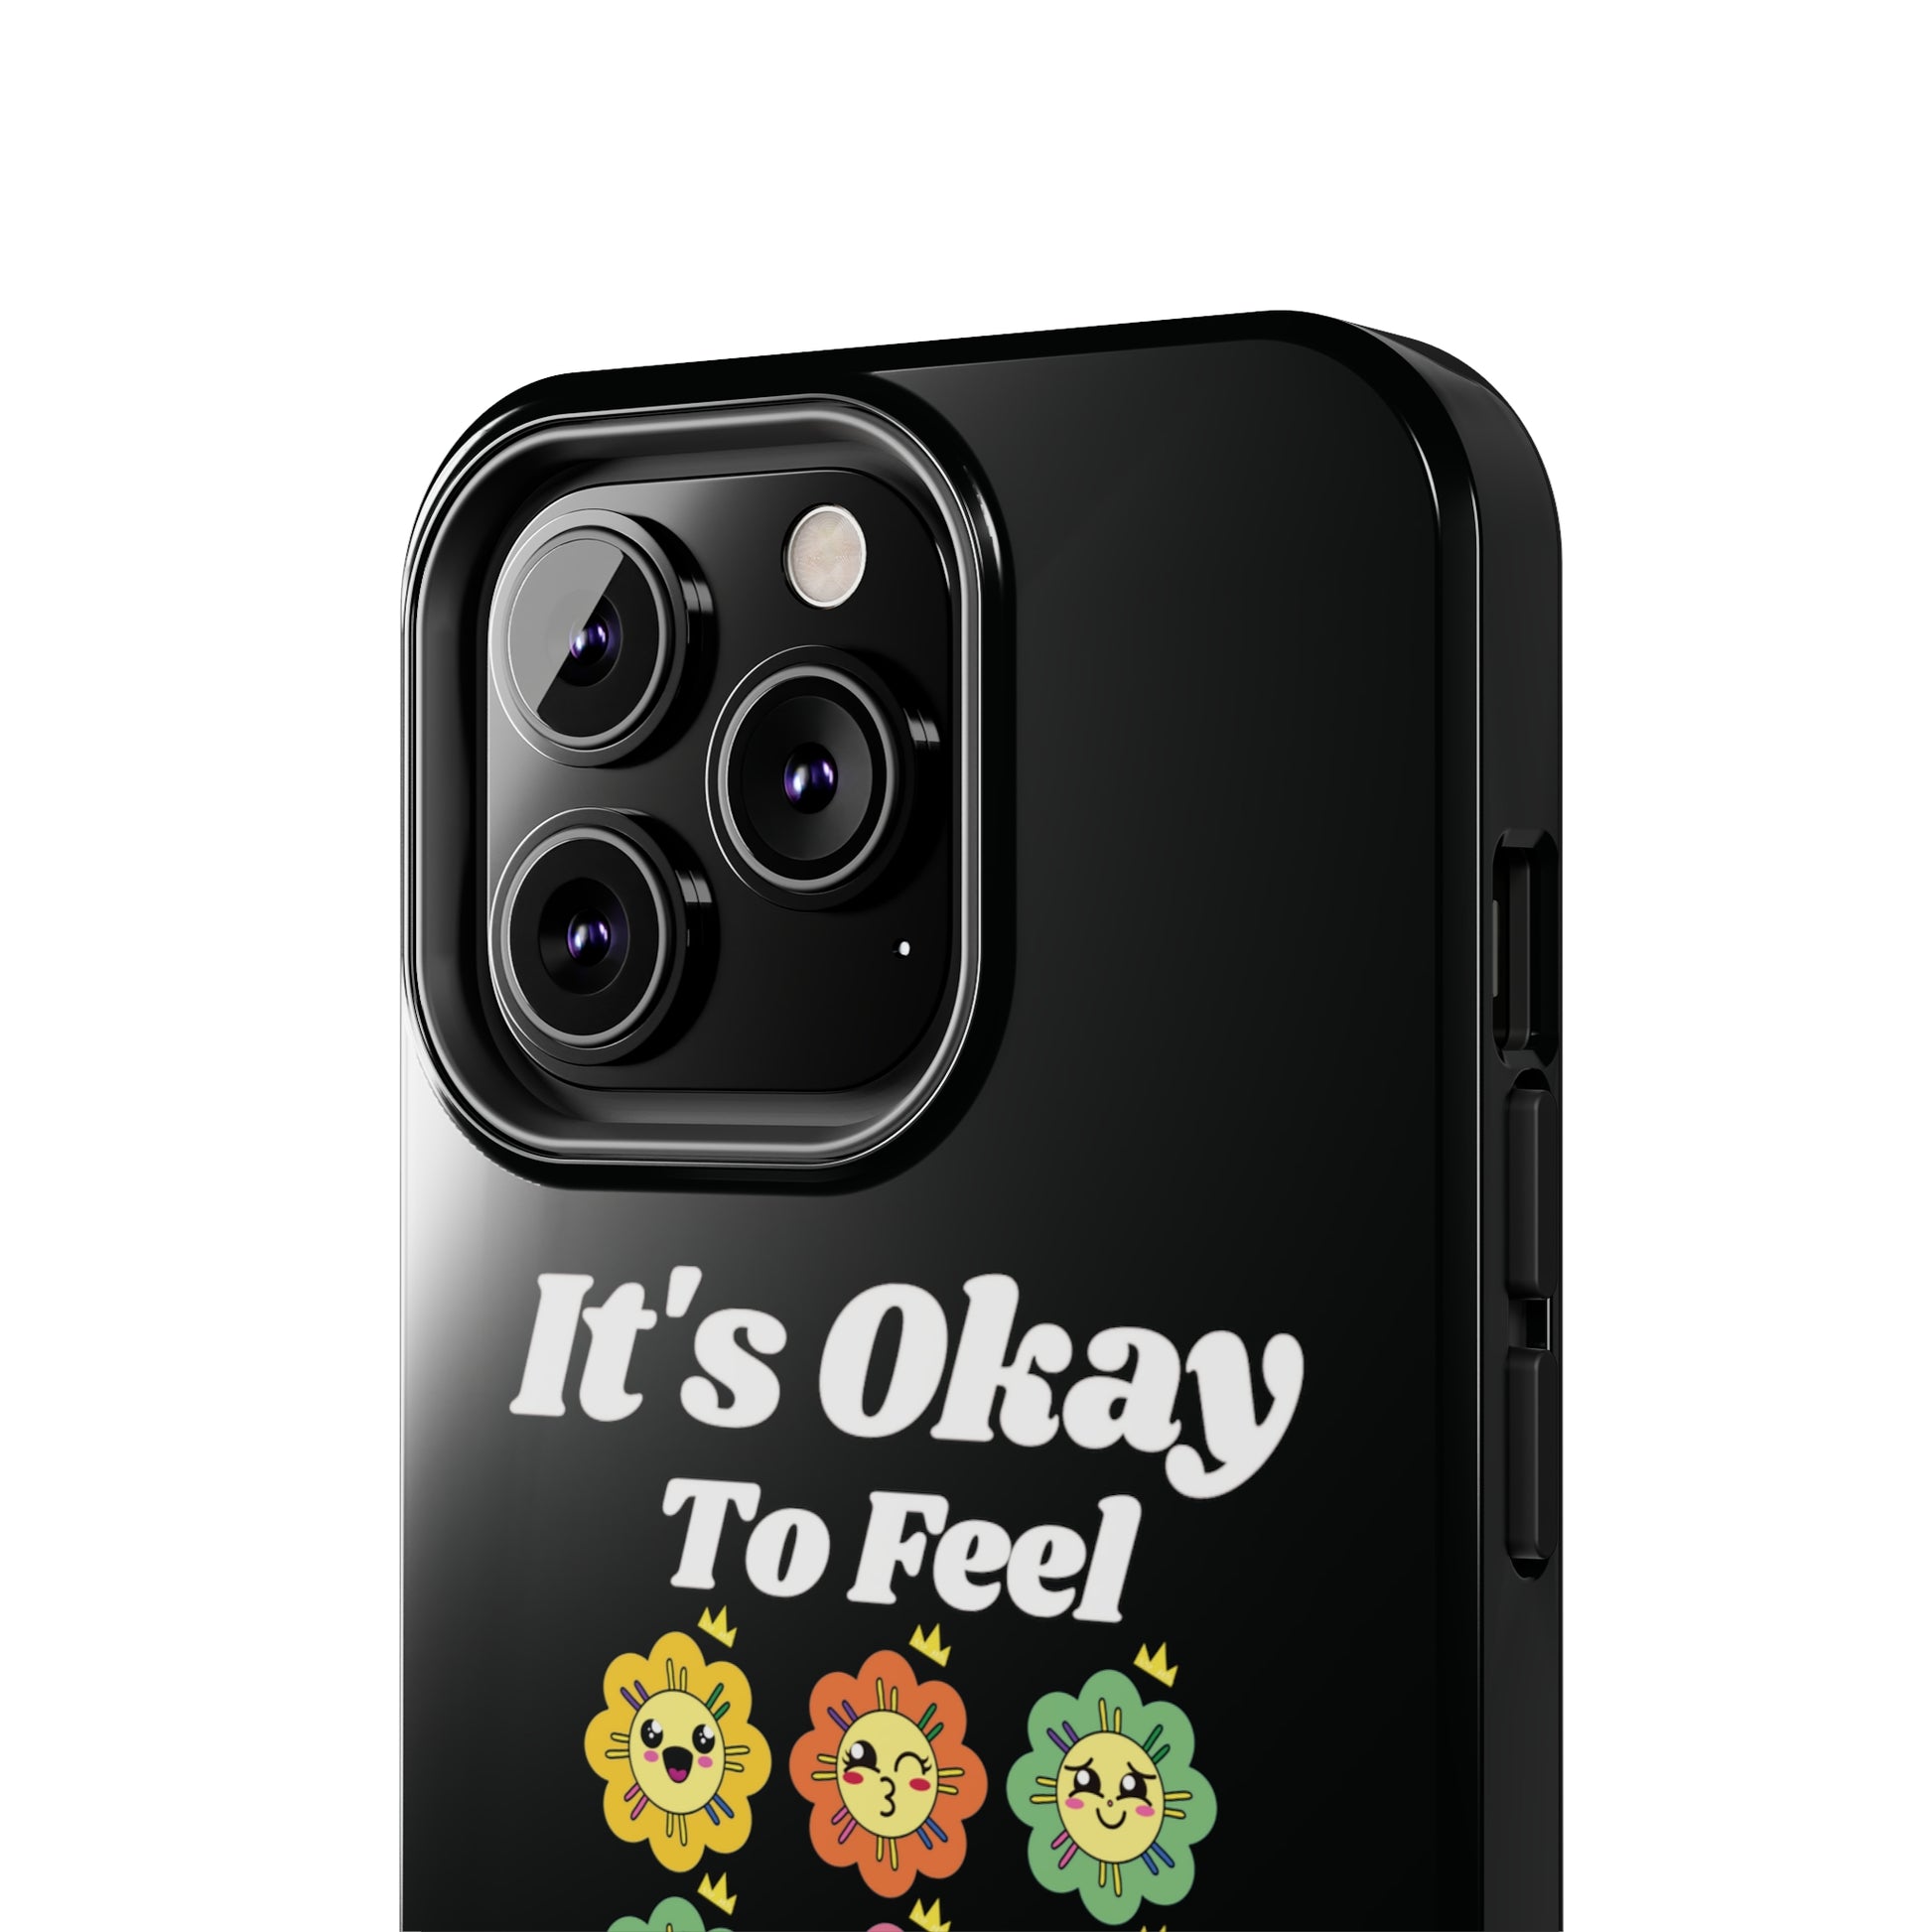 It's Okay To Feel All The Feels iPhone Case